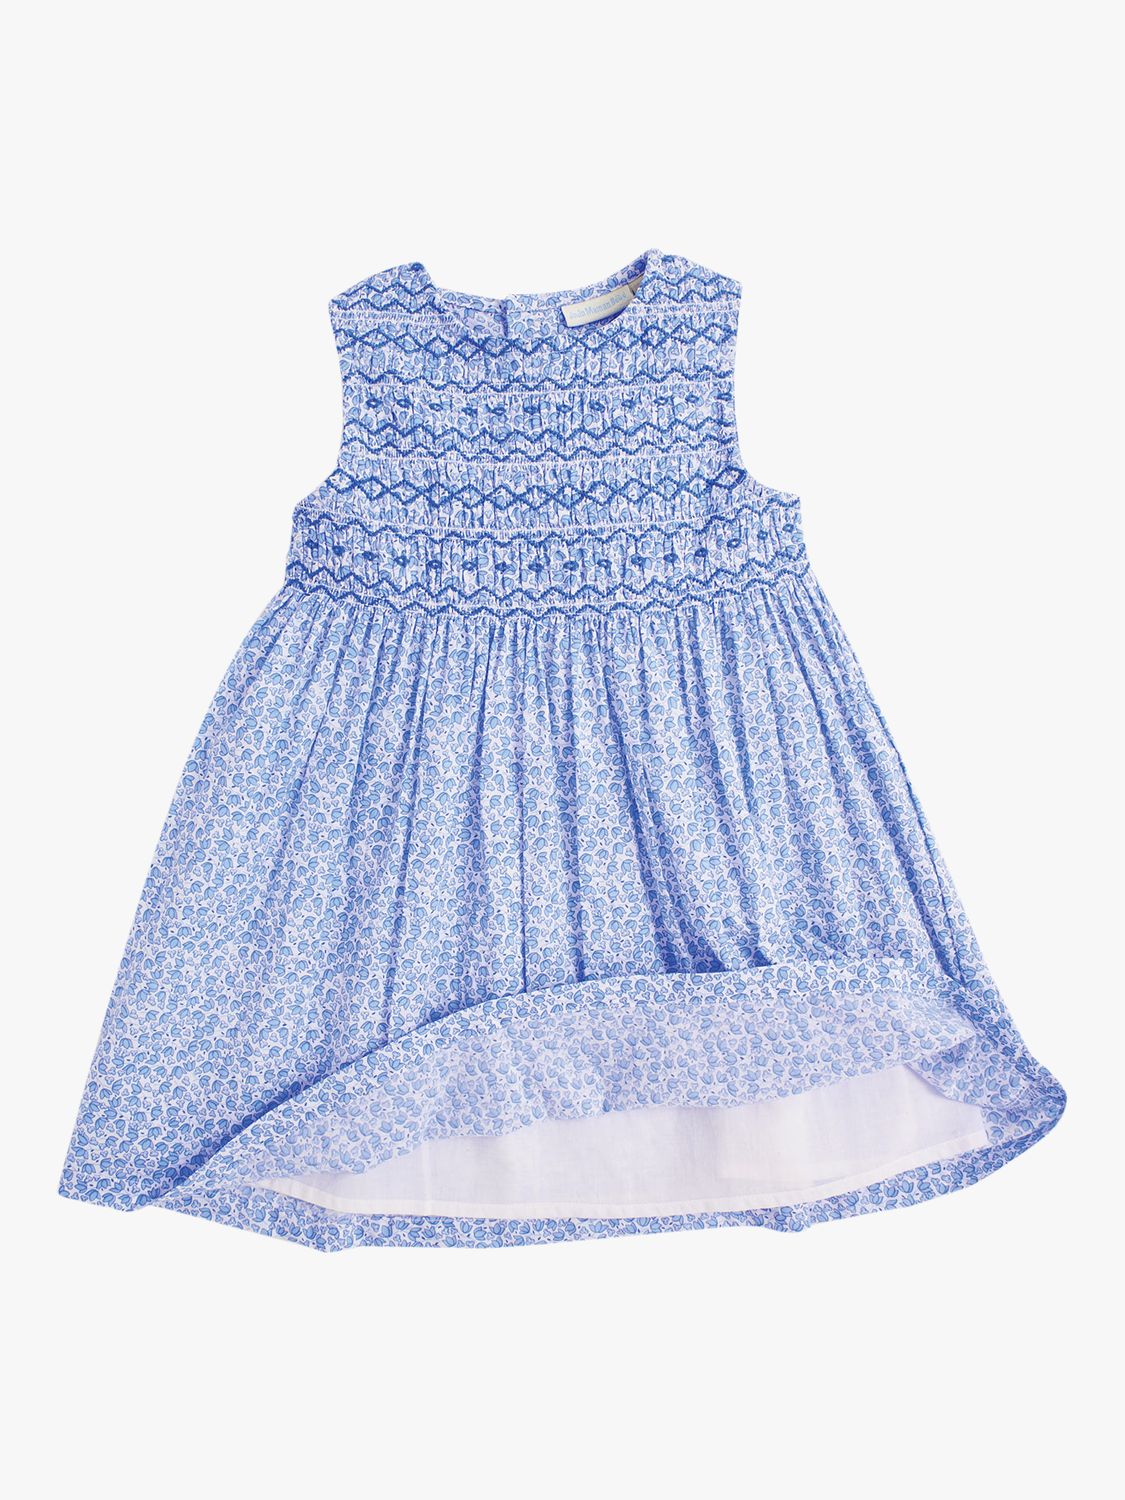 JoJo Maman Bébé Baby Floral Bud Embroidered Smock Dress, Blue, 6-7 years